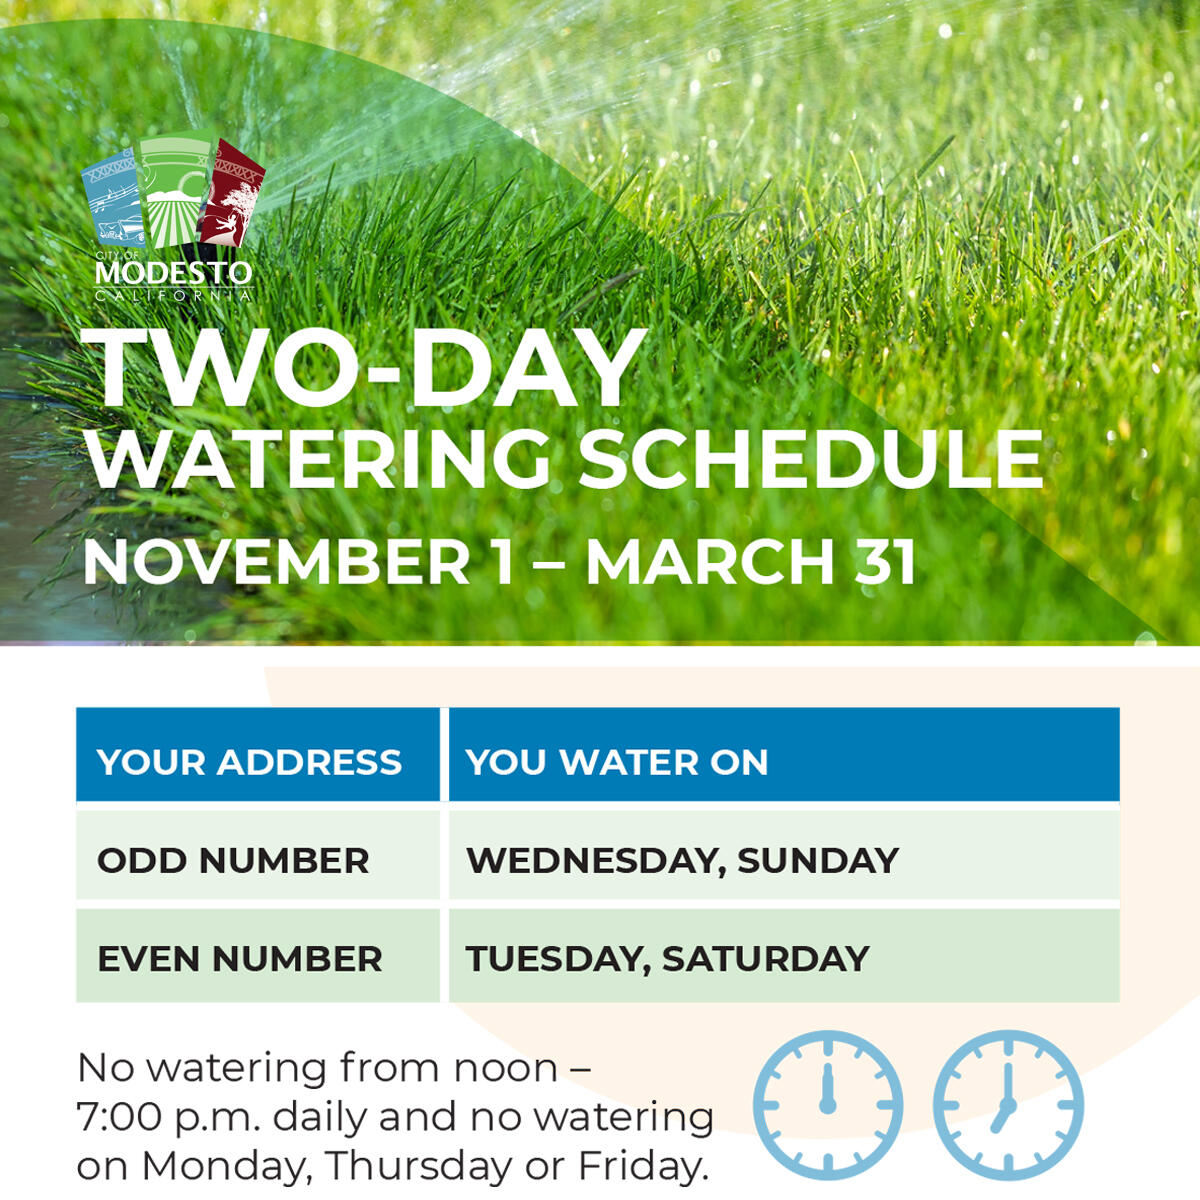 two-day-watering-effective-today-through-march-31-2022-city-of